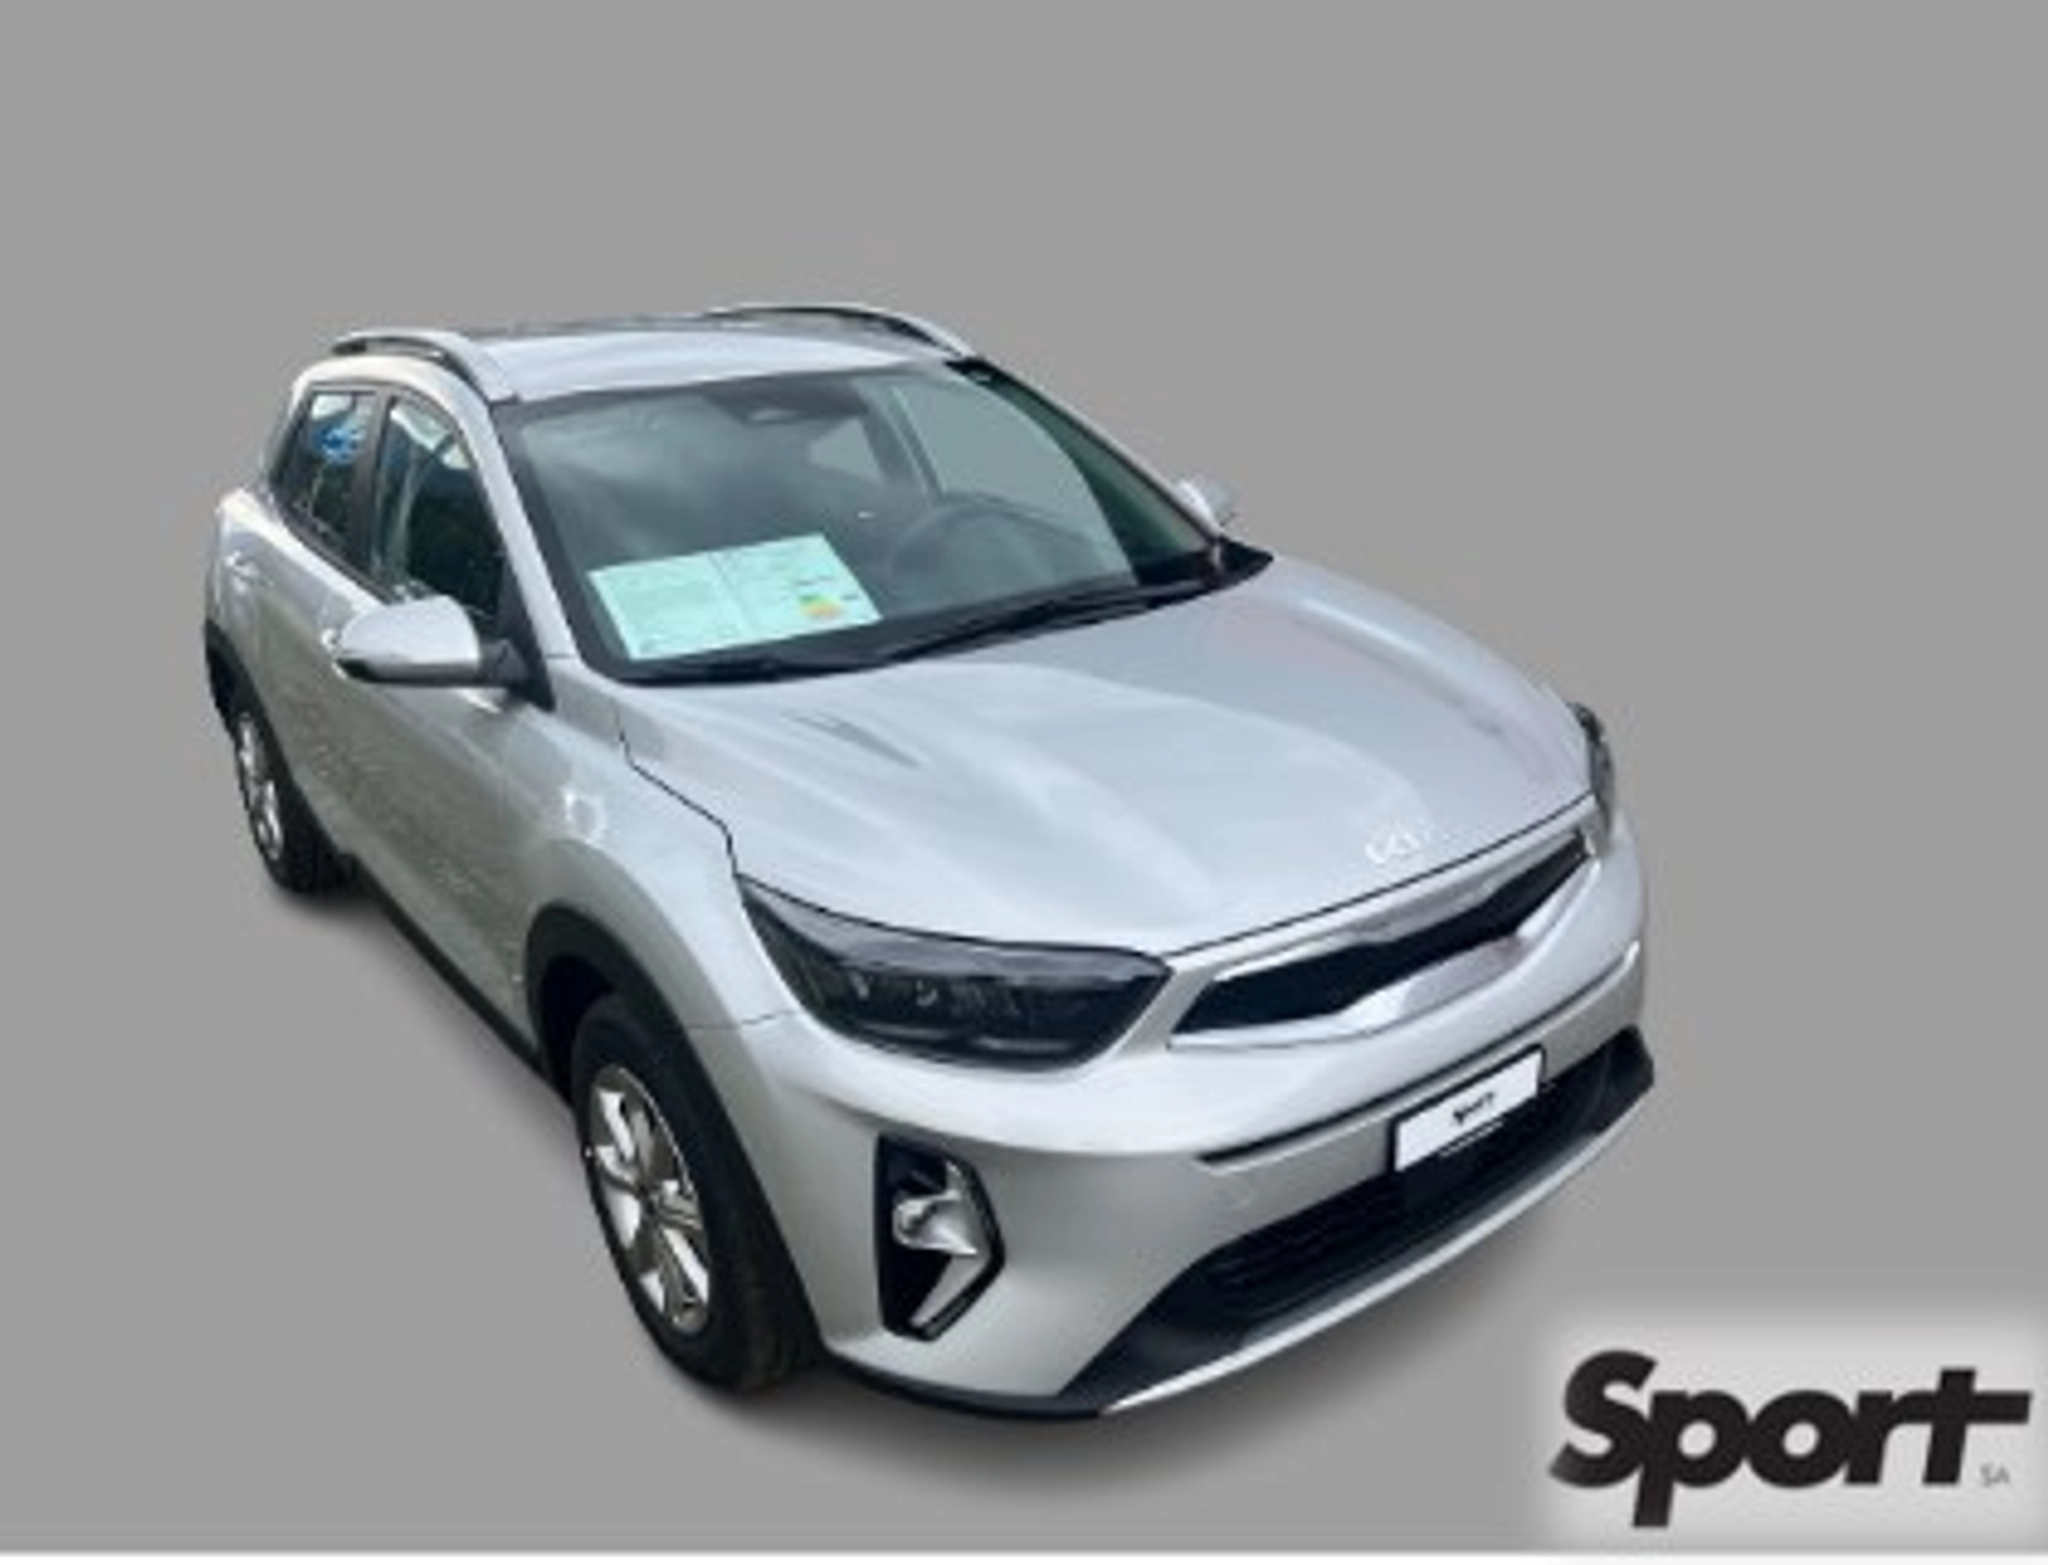 Used KIA Stonic Leasing in Switzerland from CHF 229 